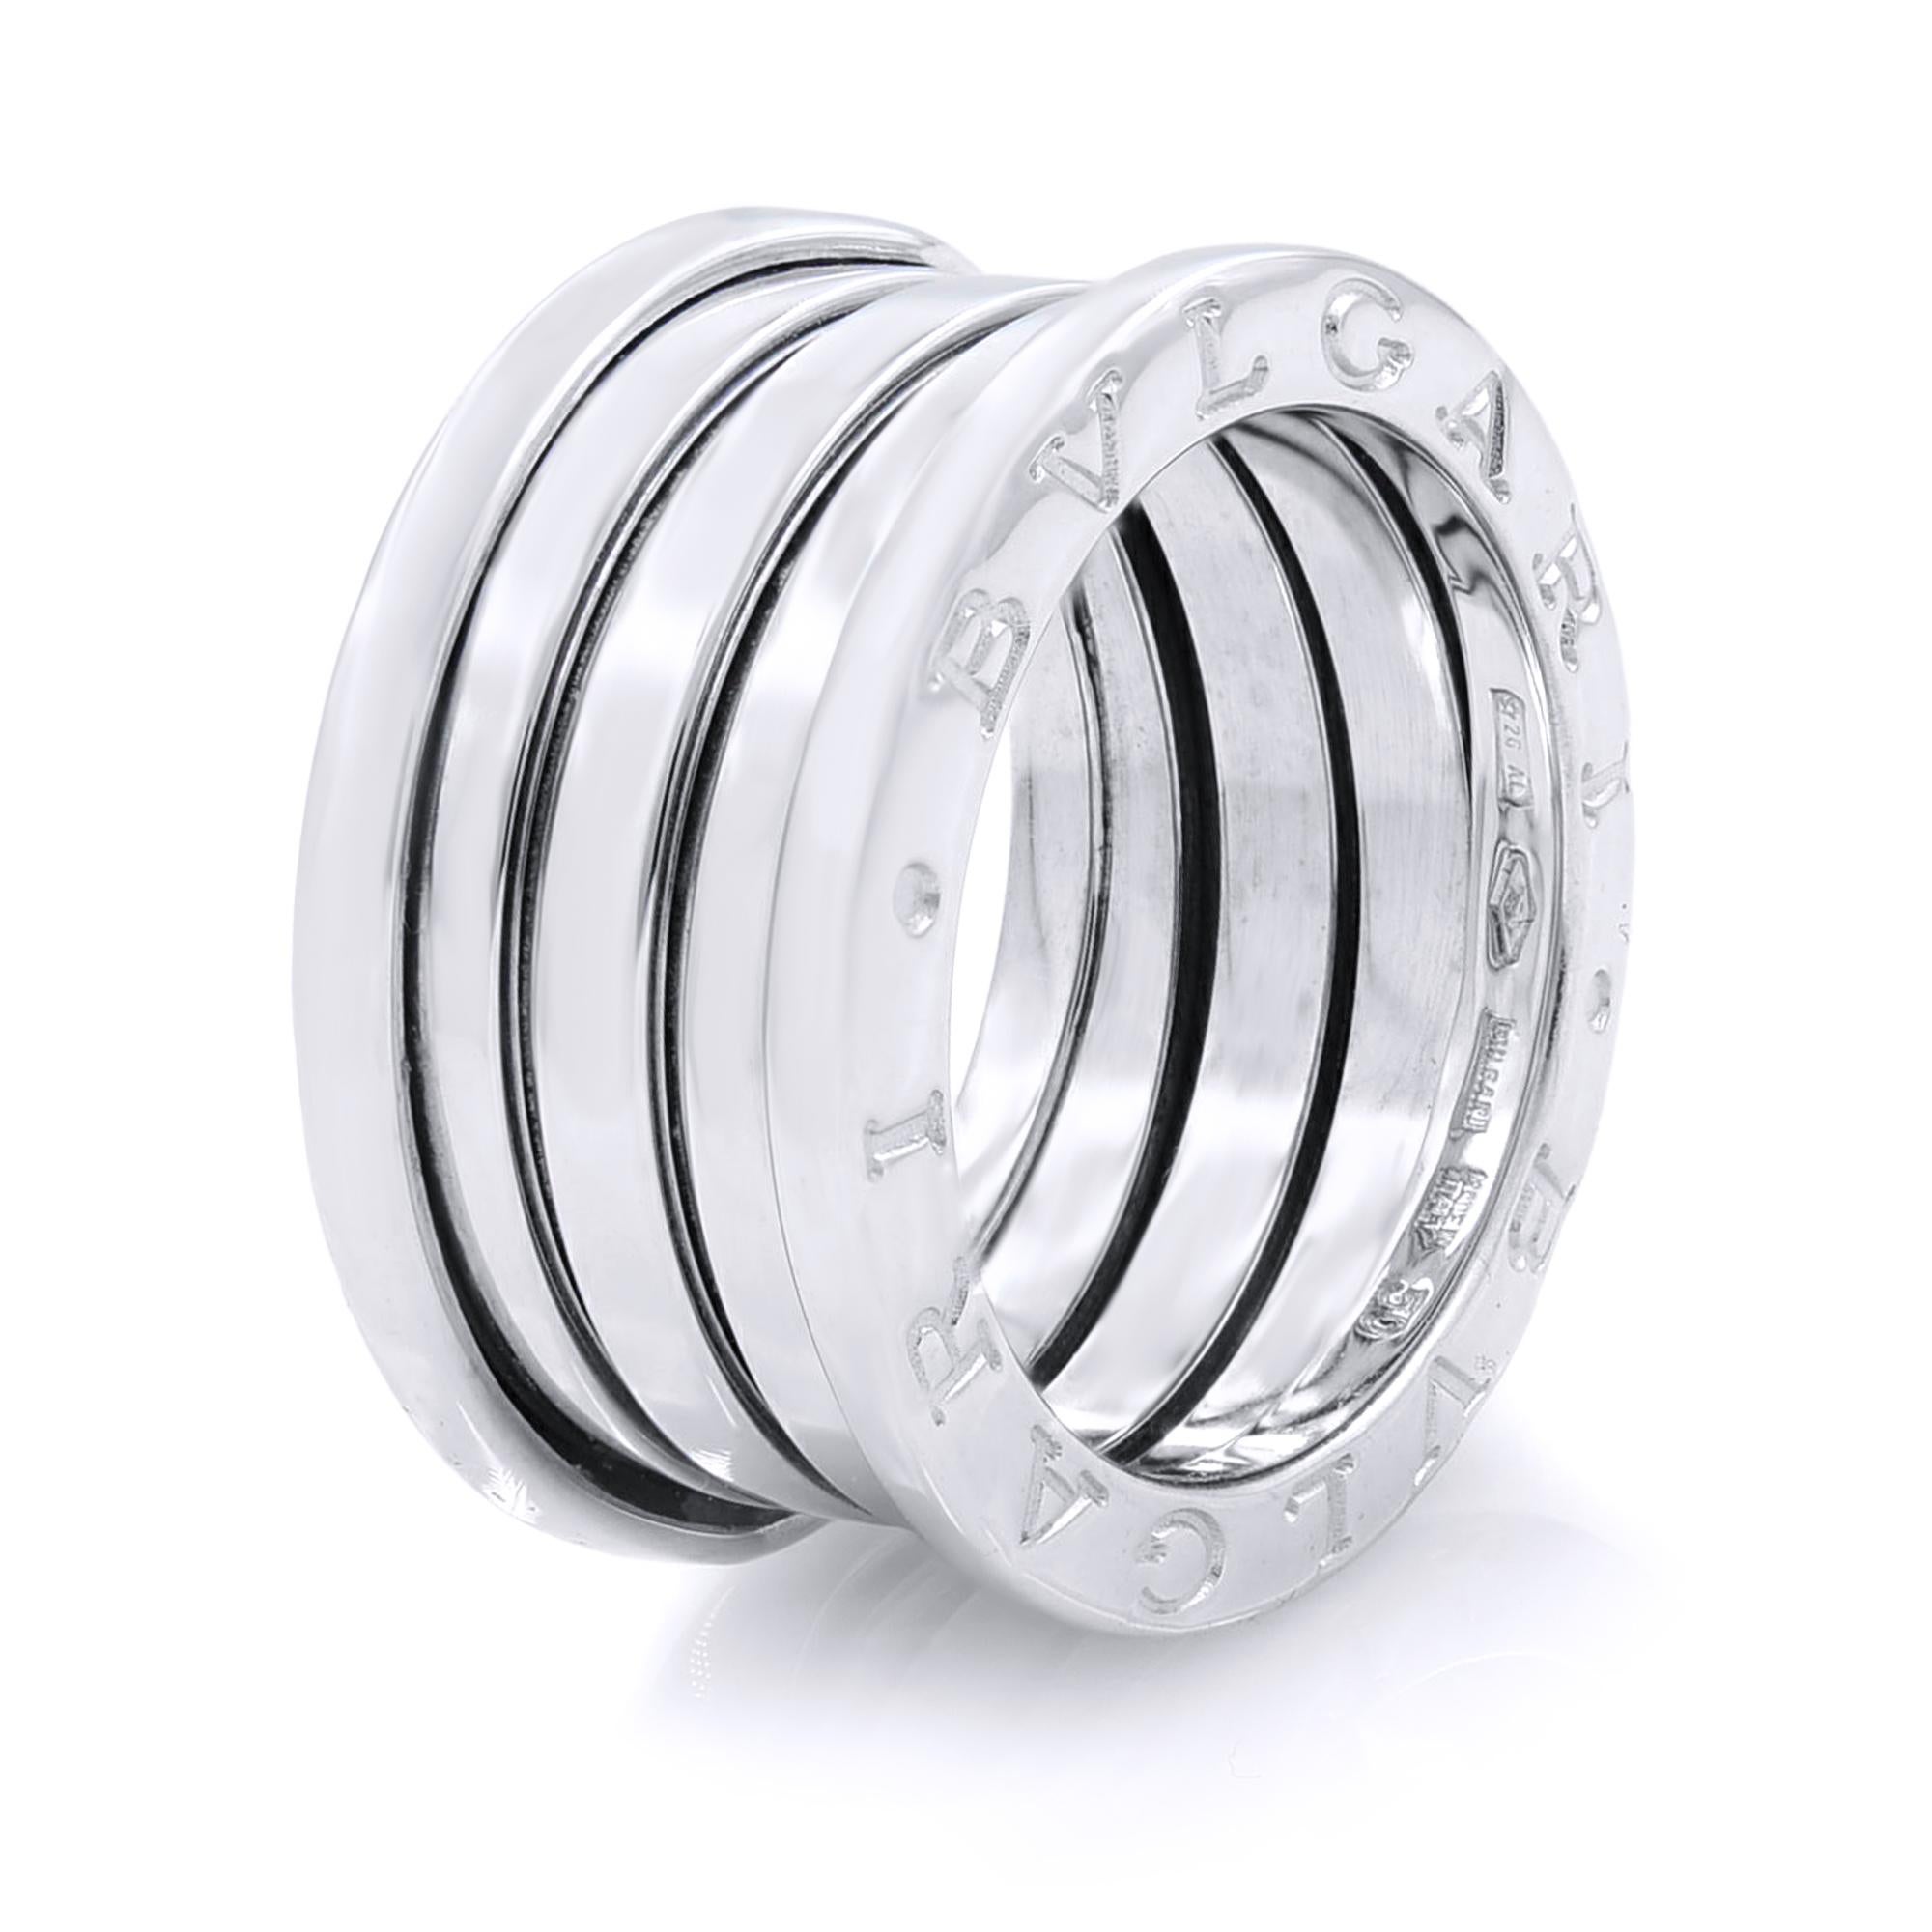 The B.Zero ring is a signature piece from the legendary jewelry design house Bvlgari. It features a clean, modern design with a white gold central band surrounded by two white gold rims with the BVLGARI logo engraved on both sides. You will love